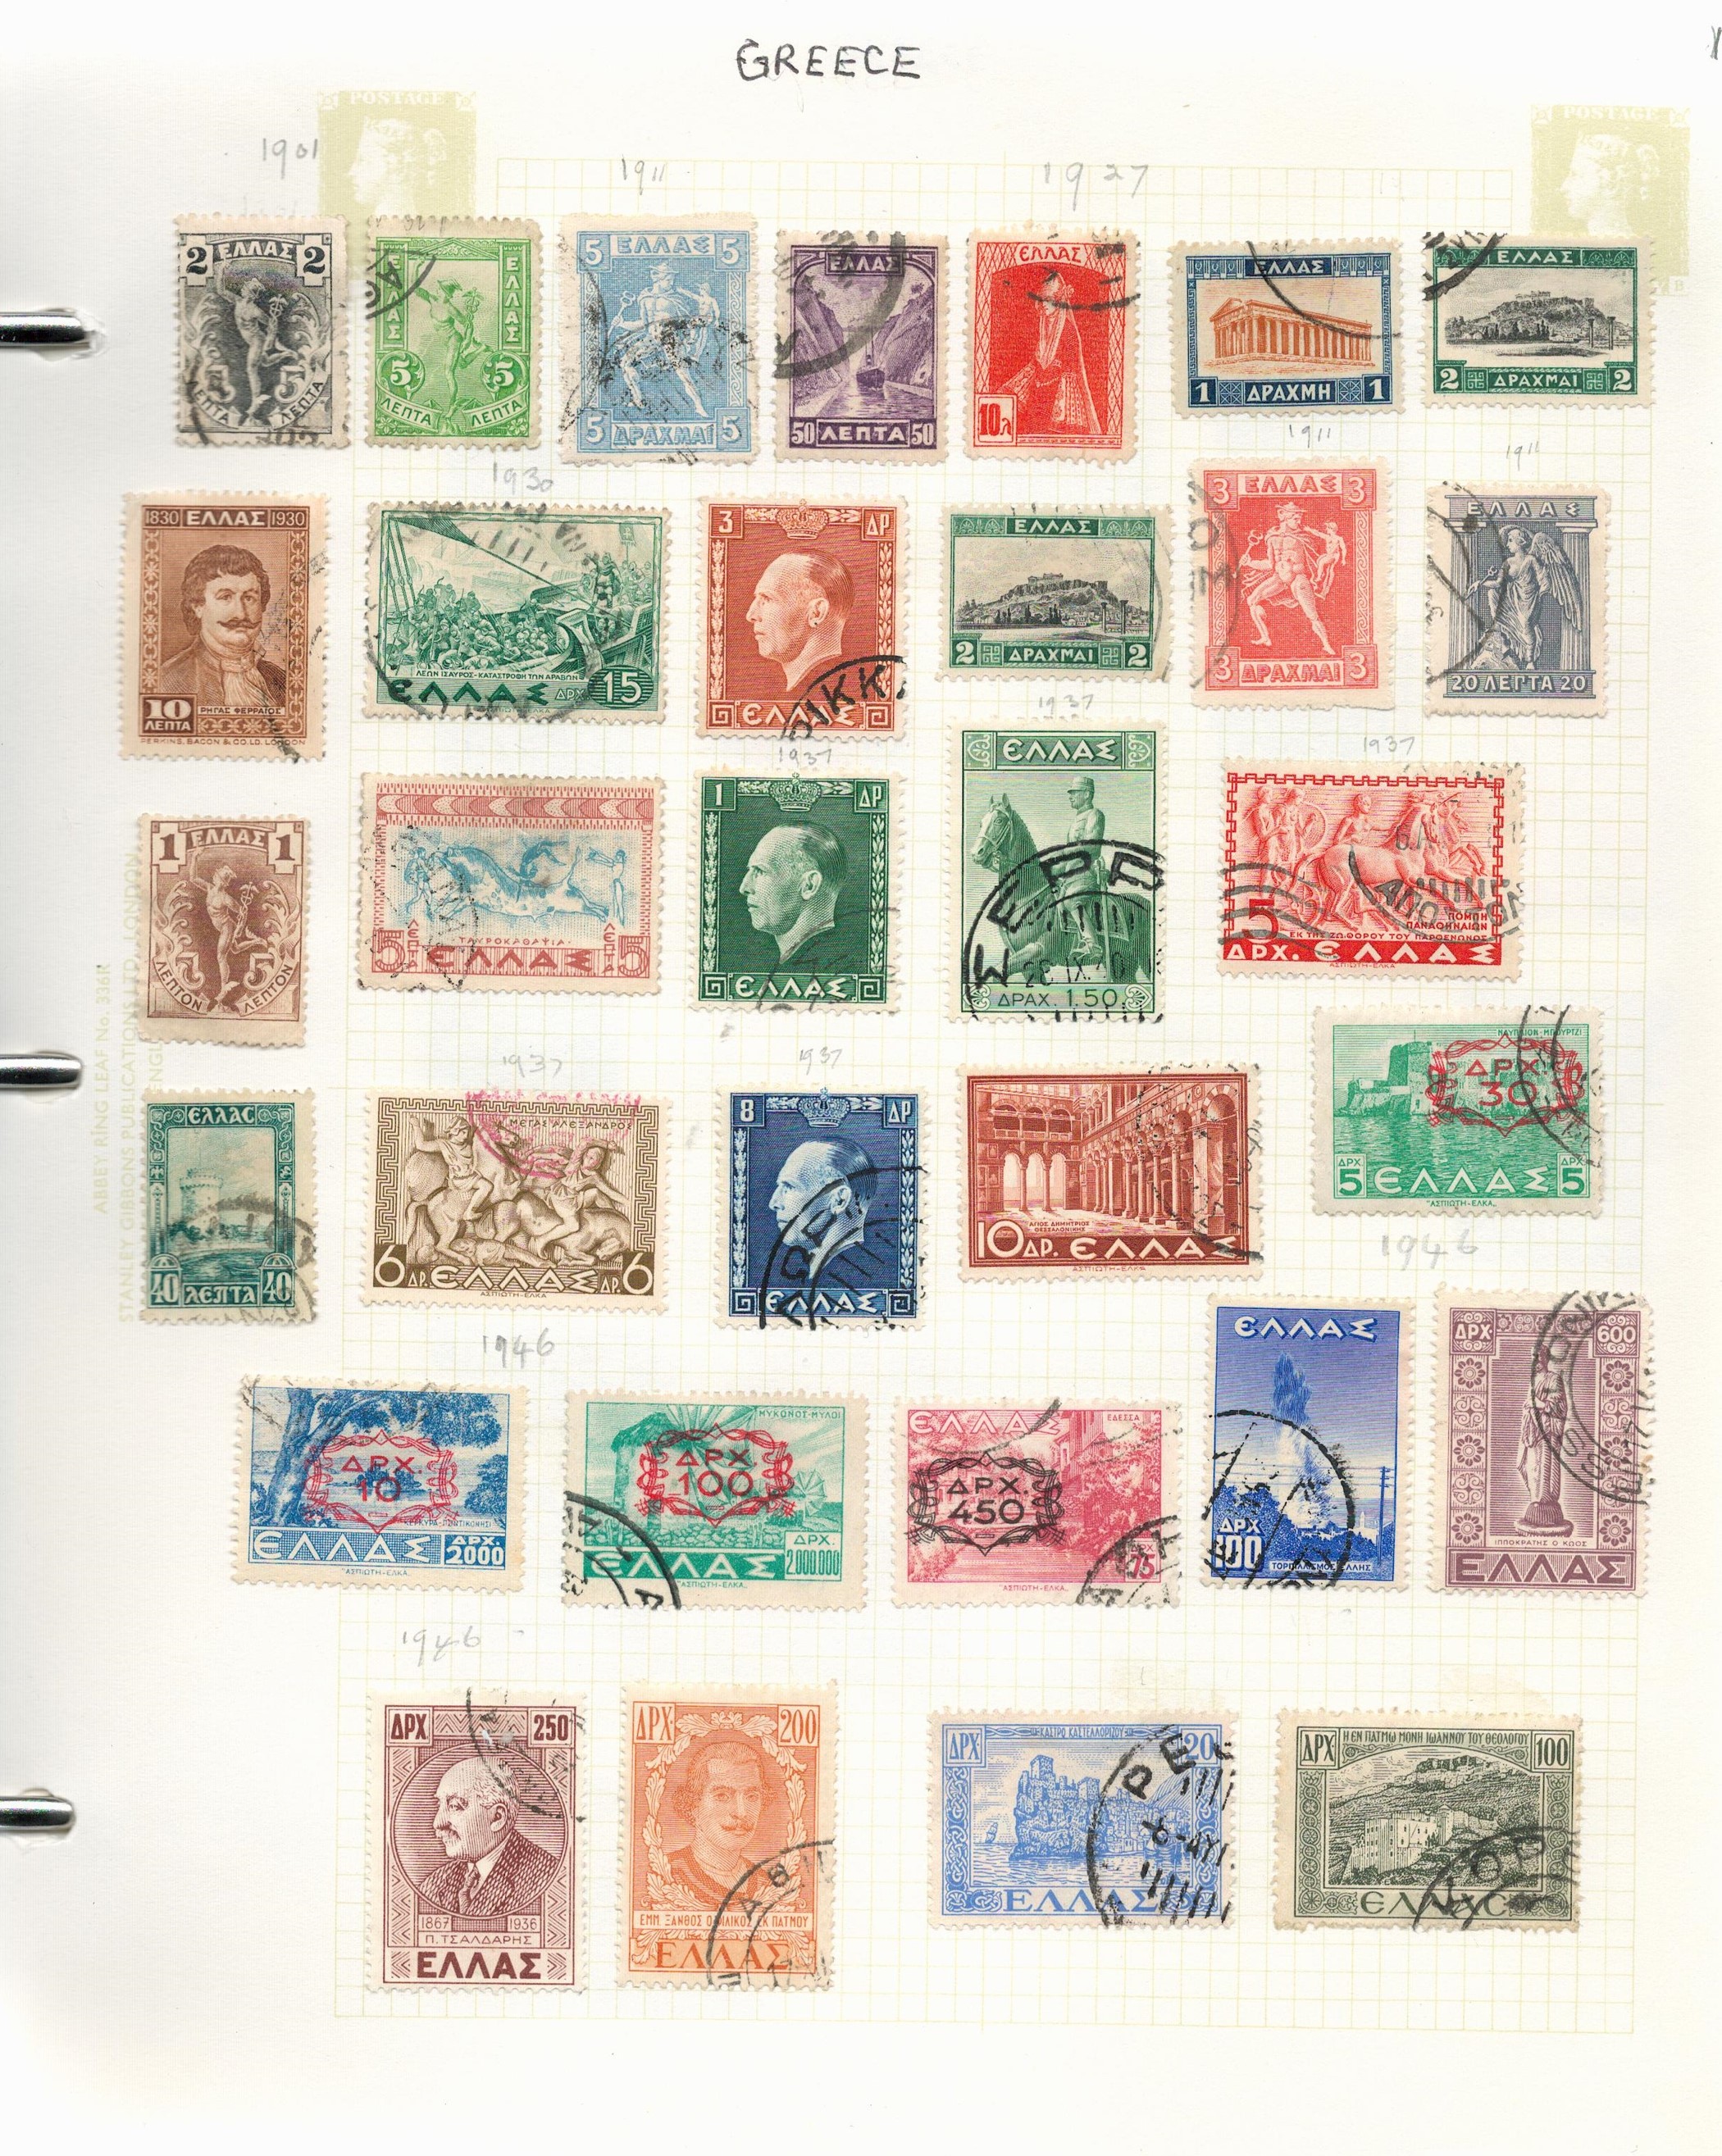 European and Russia M and U in a Binder Stamps from late 1800s to 1900s Countries Include Belgium, - Image 3 of 3